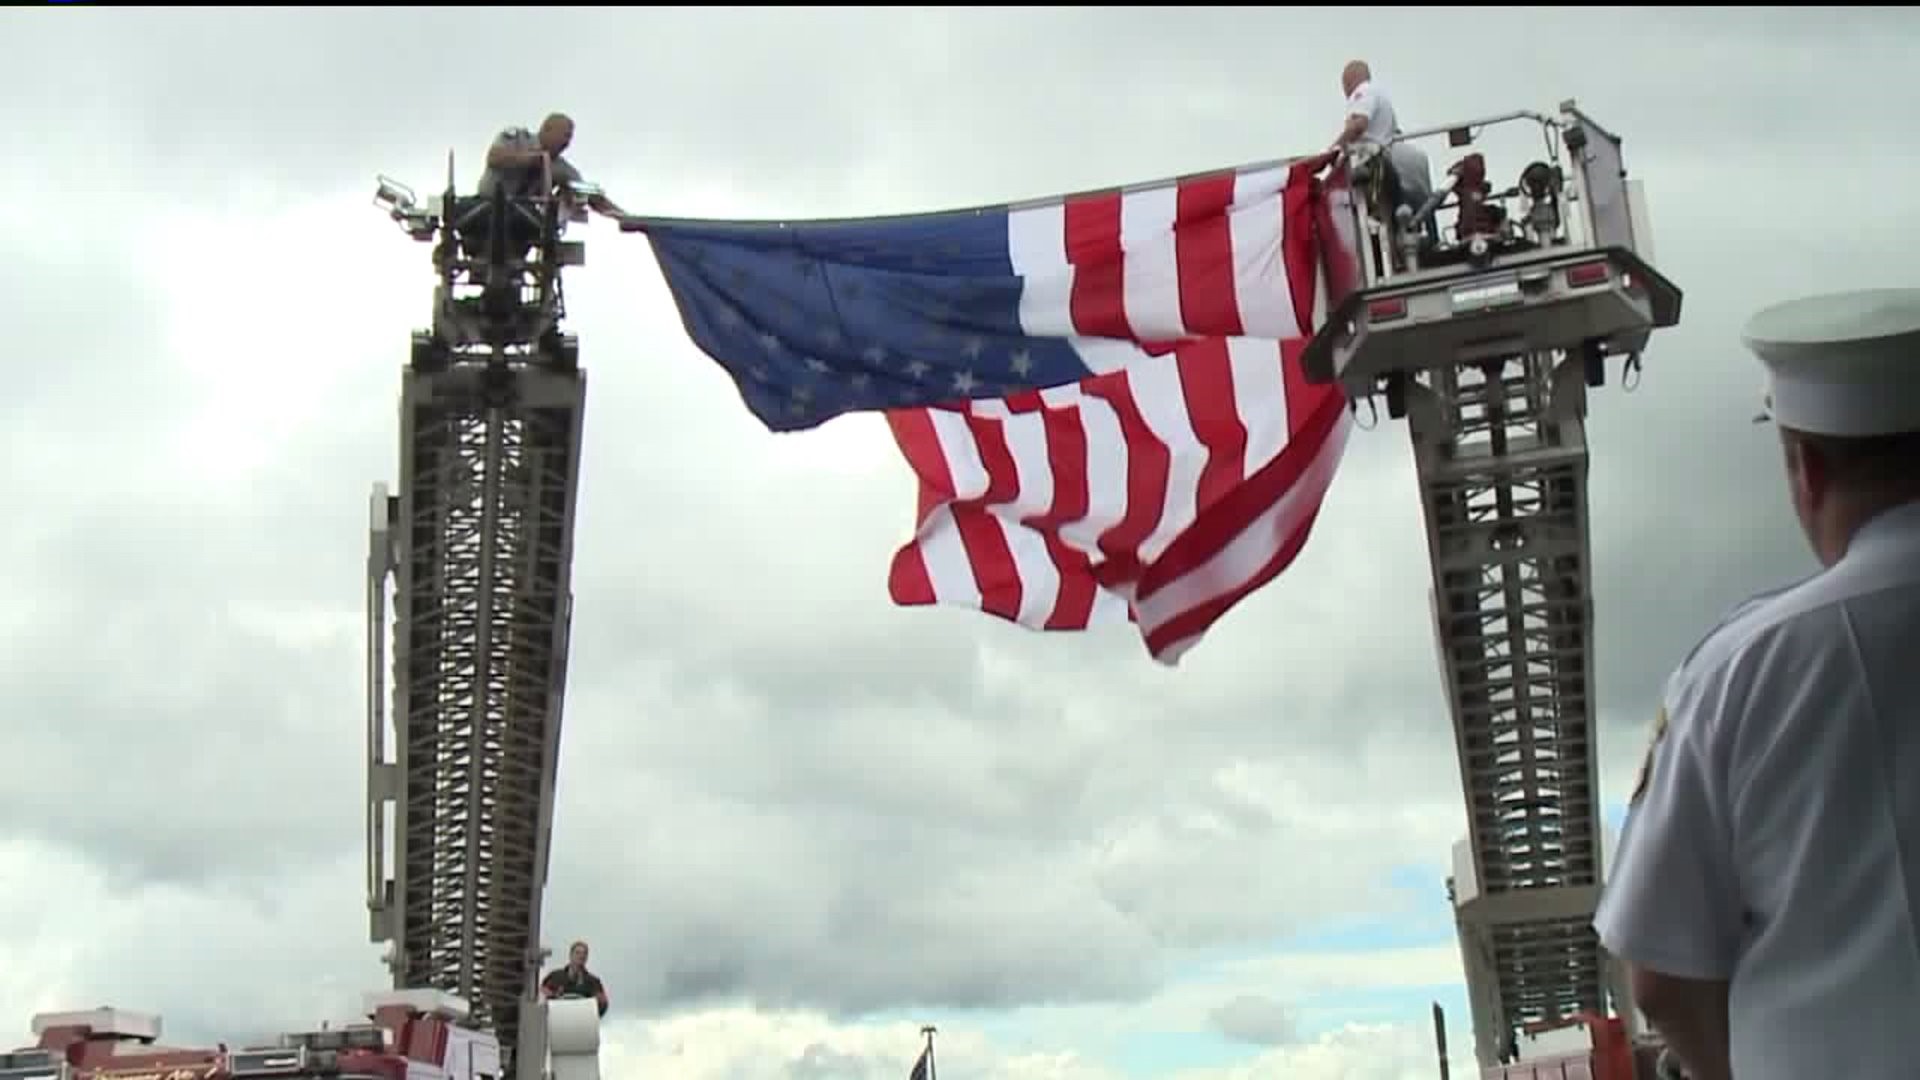 Hazleton Fire Honors the Red White and Blue